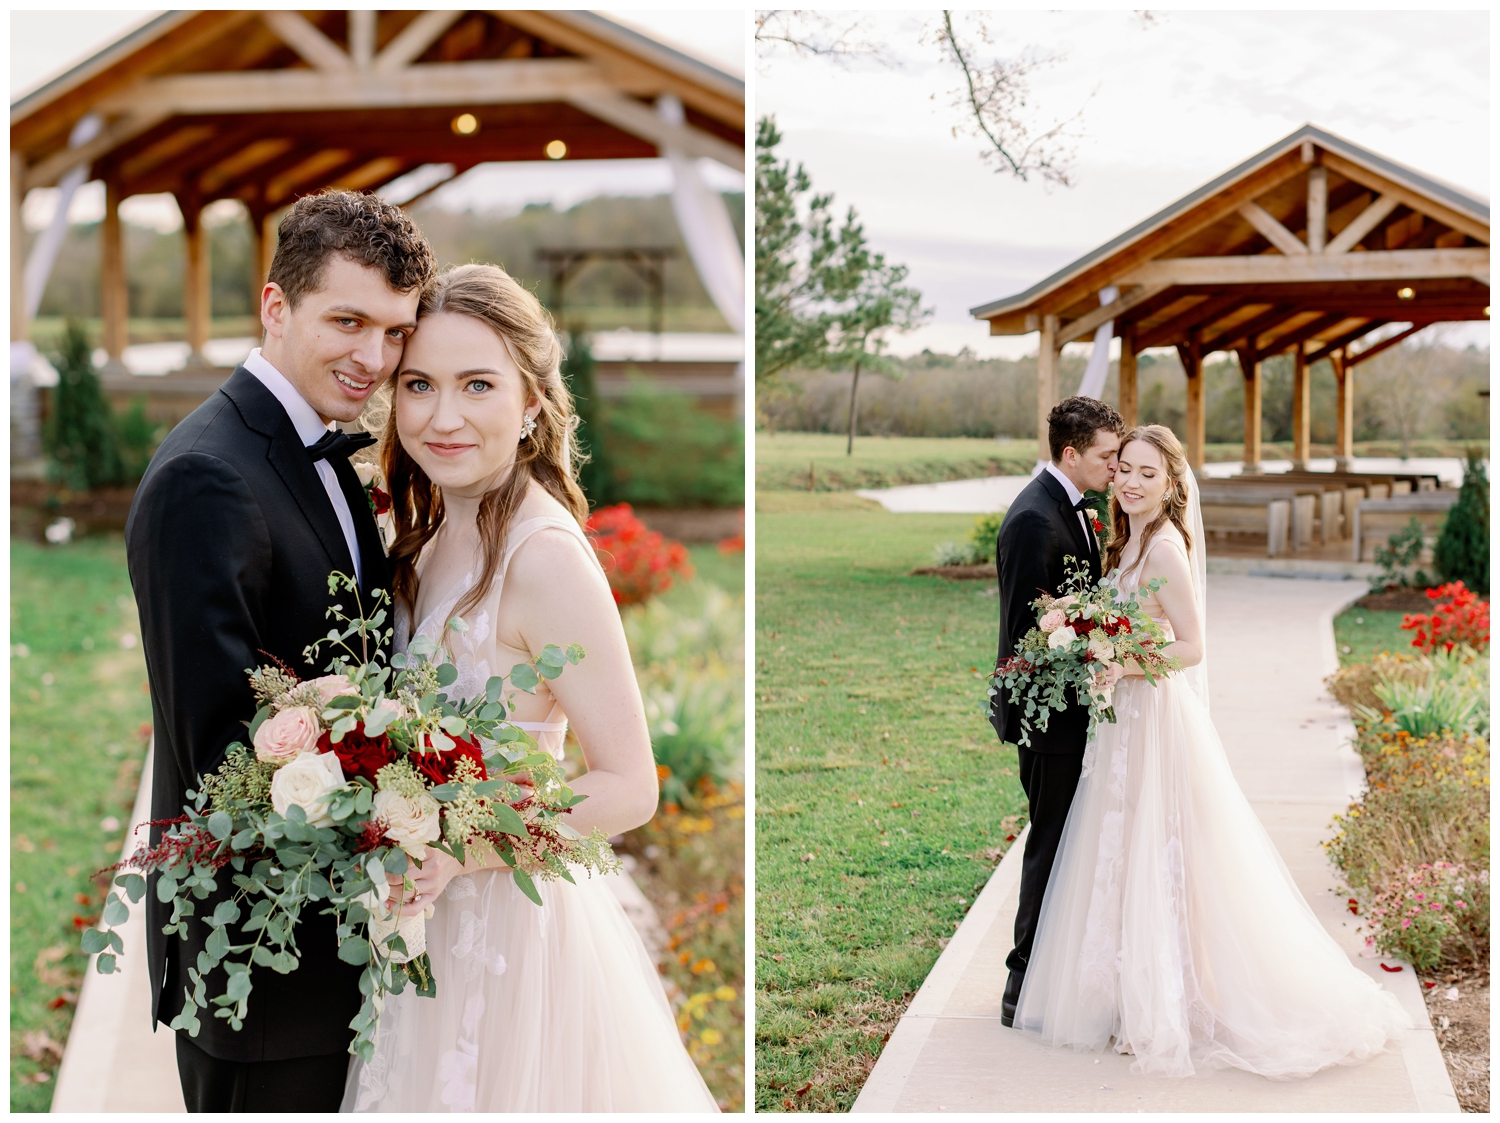 Union Ranch wedding with bride and groom posing outdoors for portraits